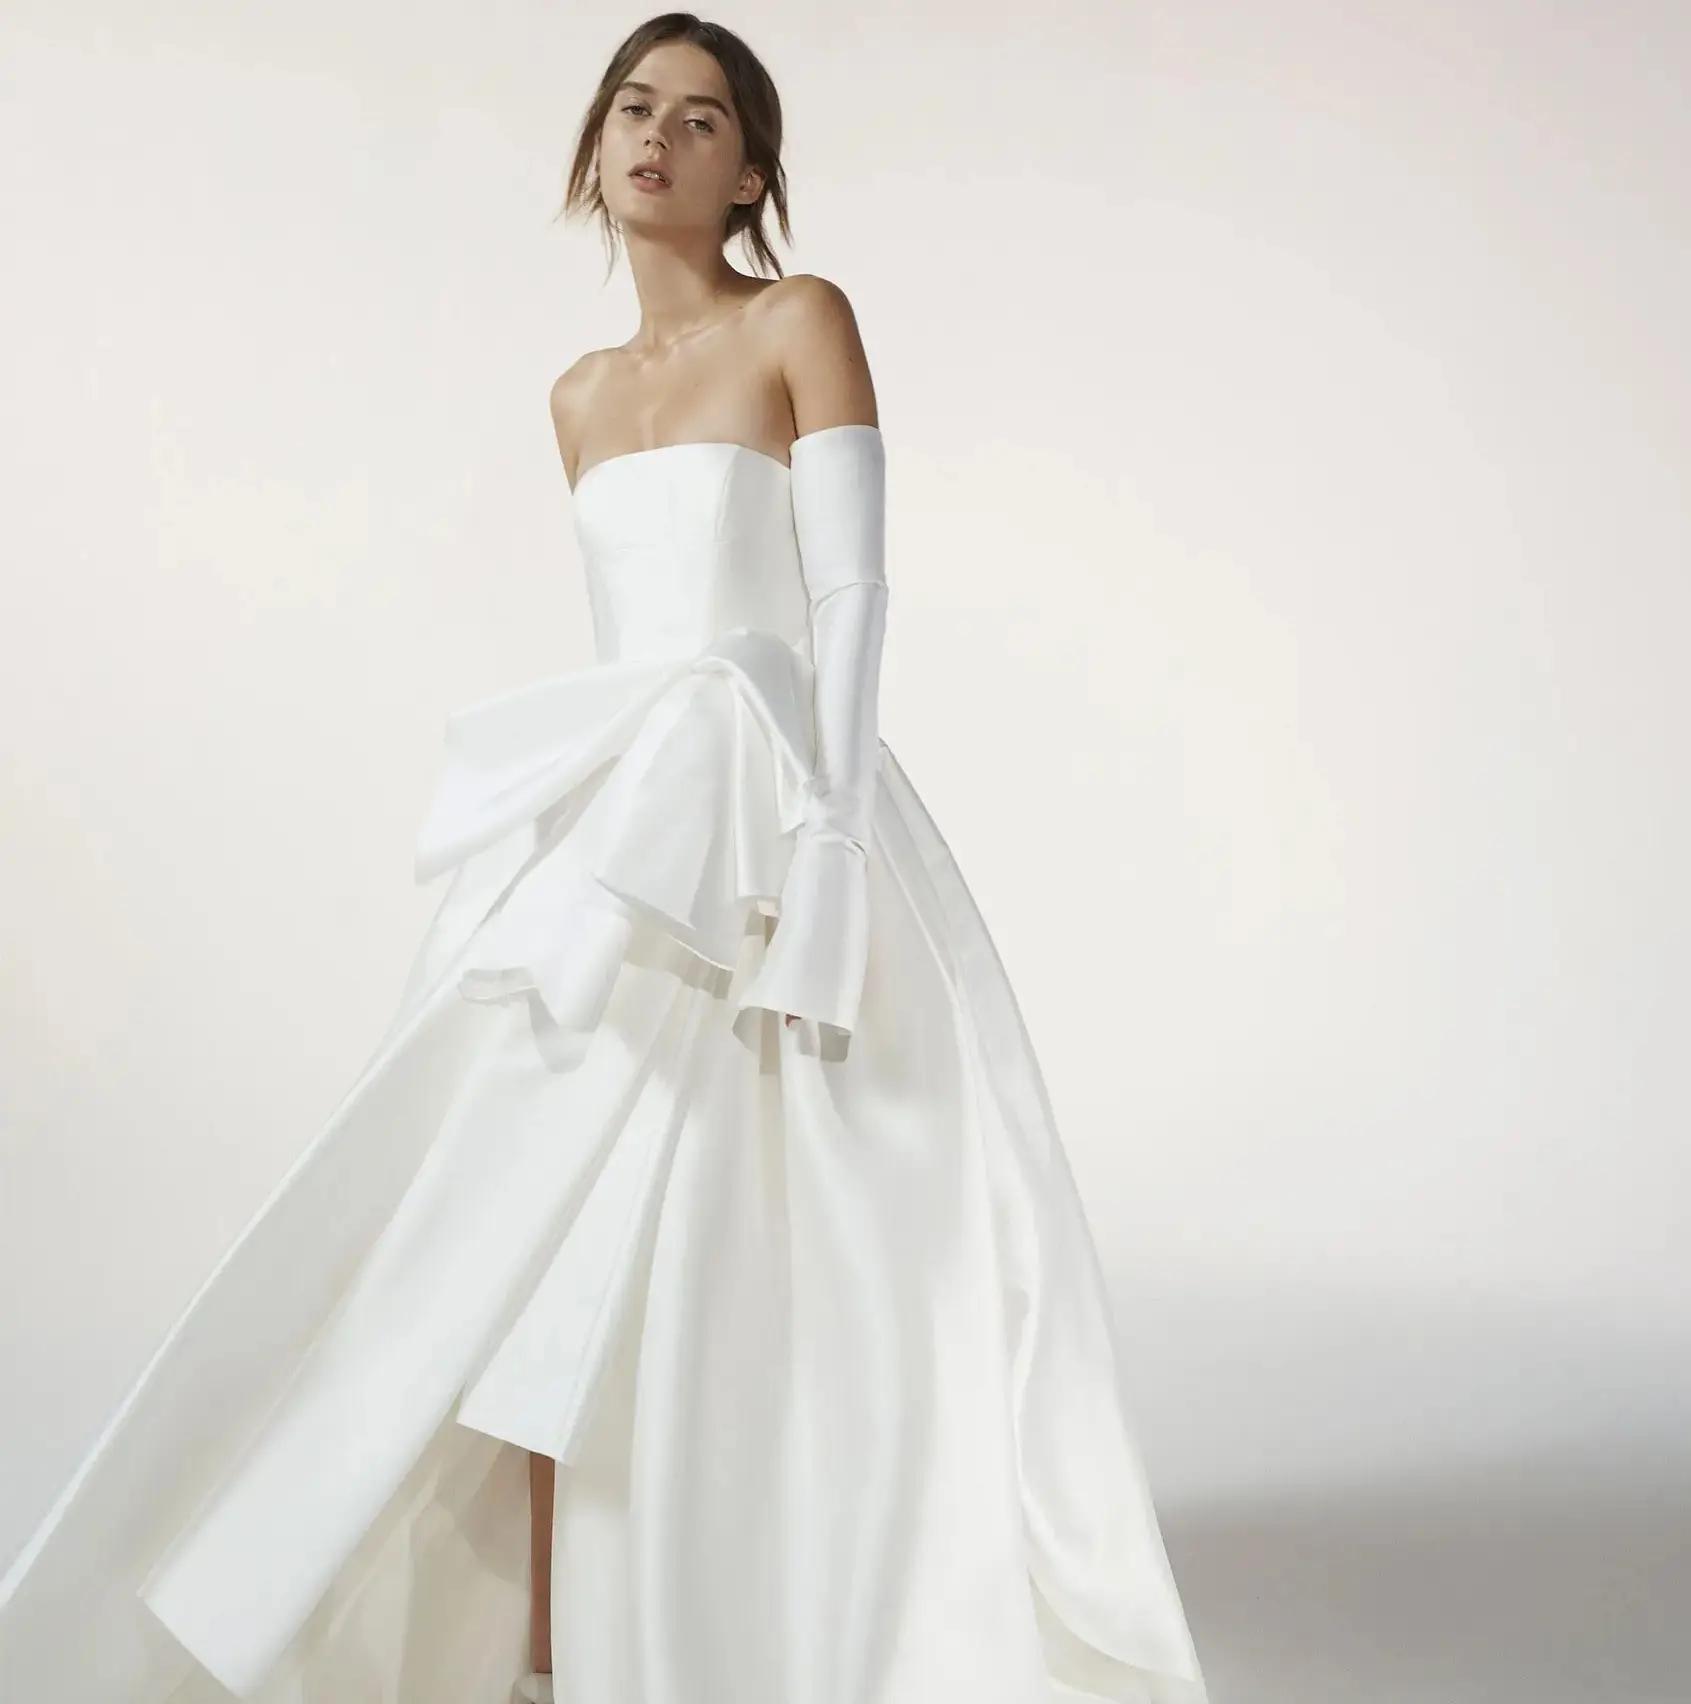 Timeless Bridal Dress Styles That Never Go Out of Fashion Image